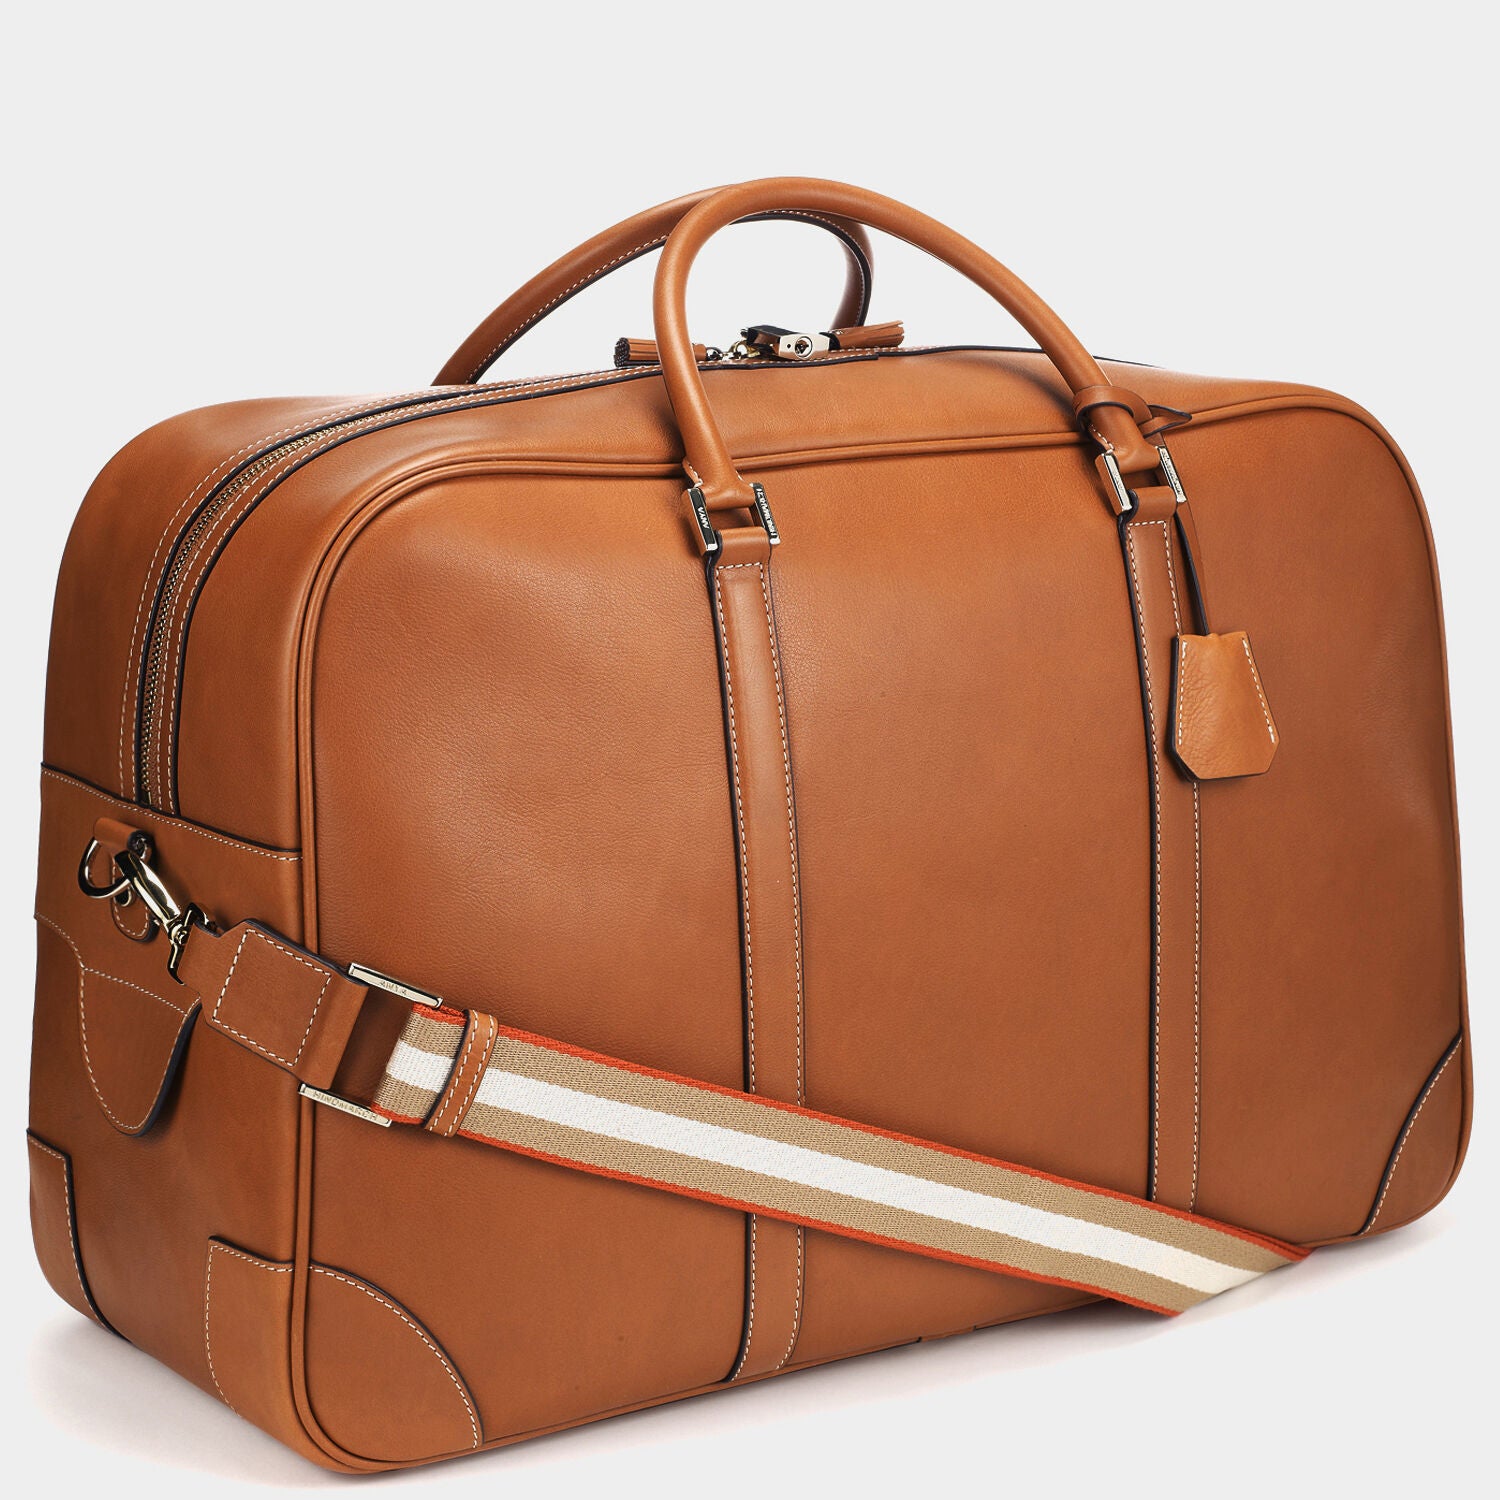 Bespoke Weekend Latimer -

                  
                    Butter Leather in Tan -
                  

                  Anya Hindmarch UK
